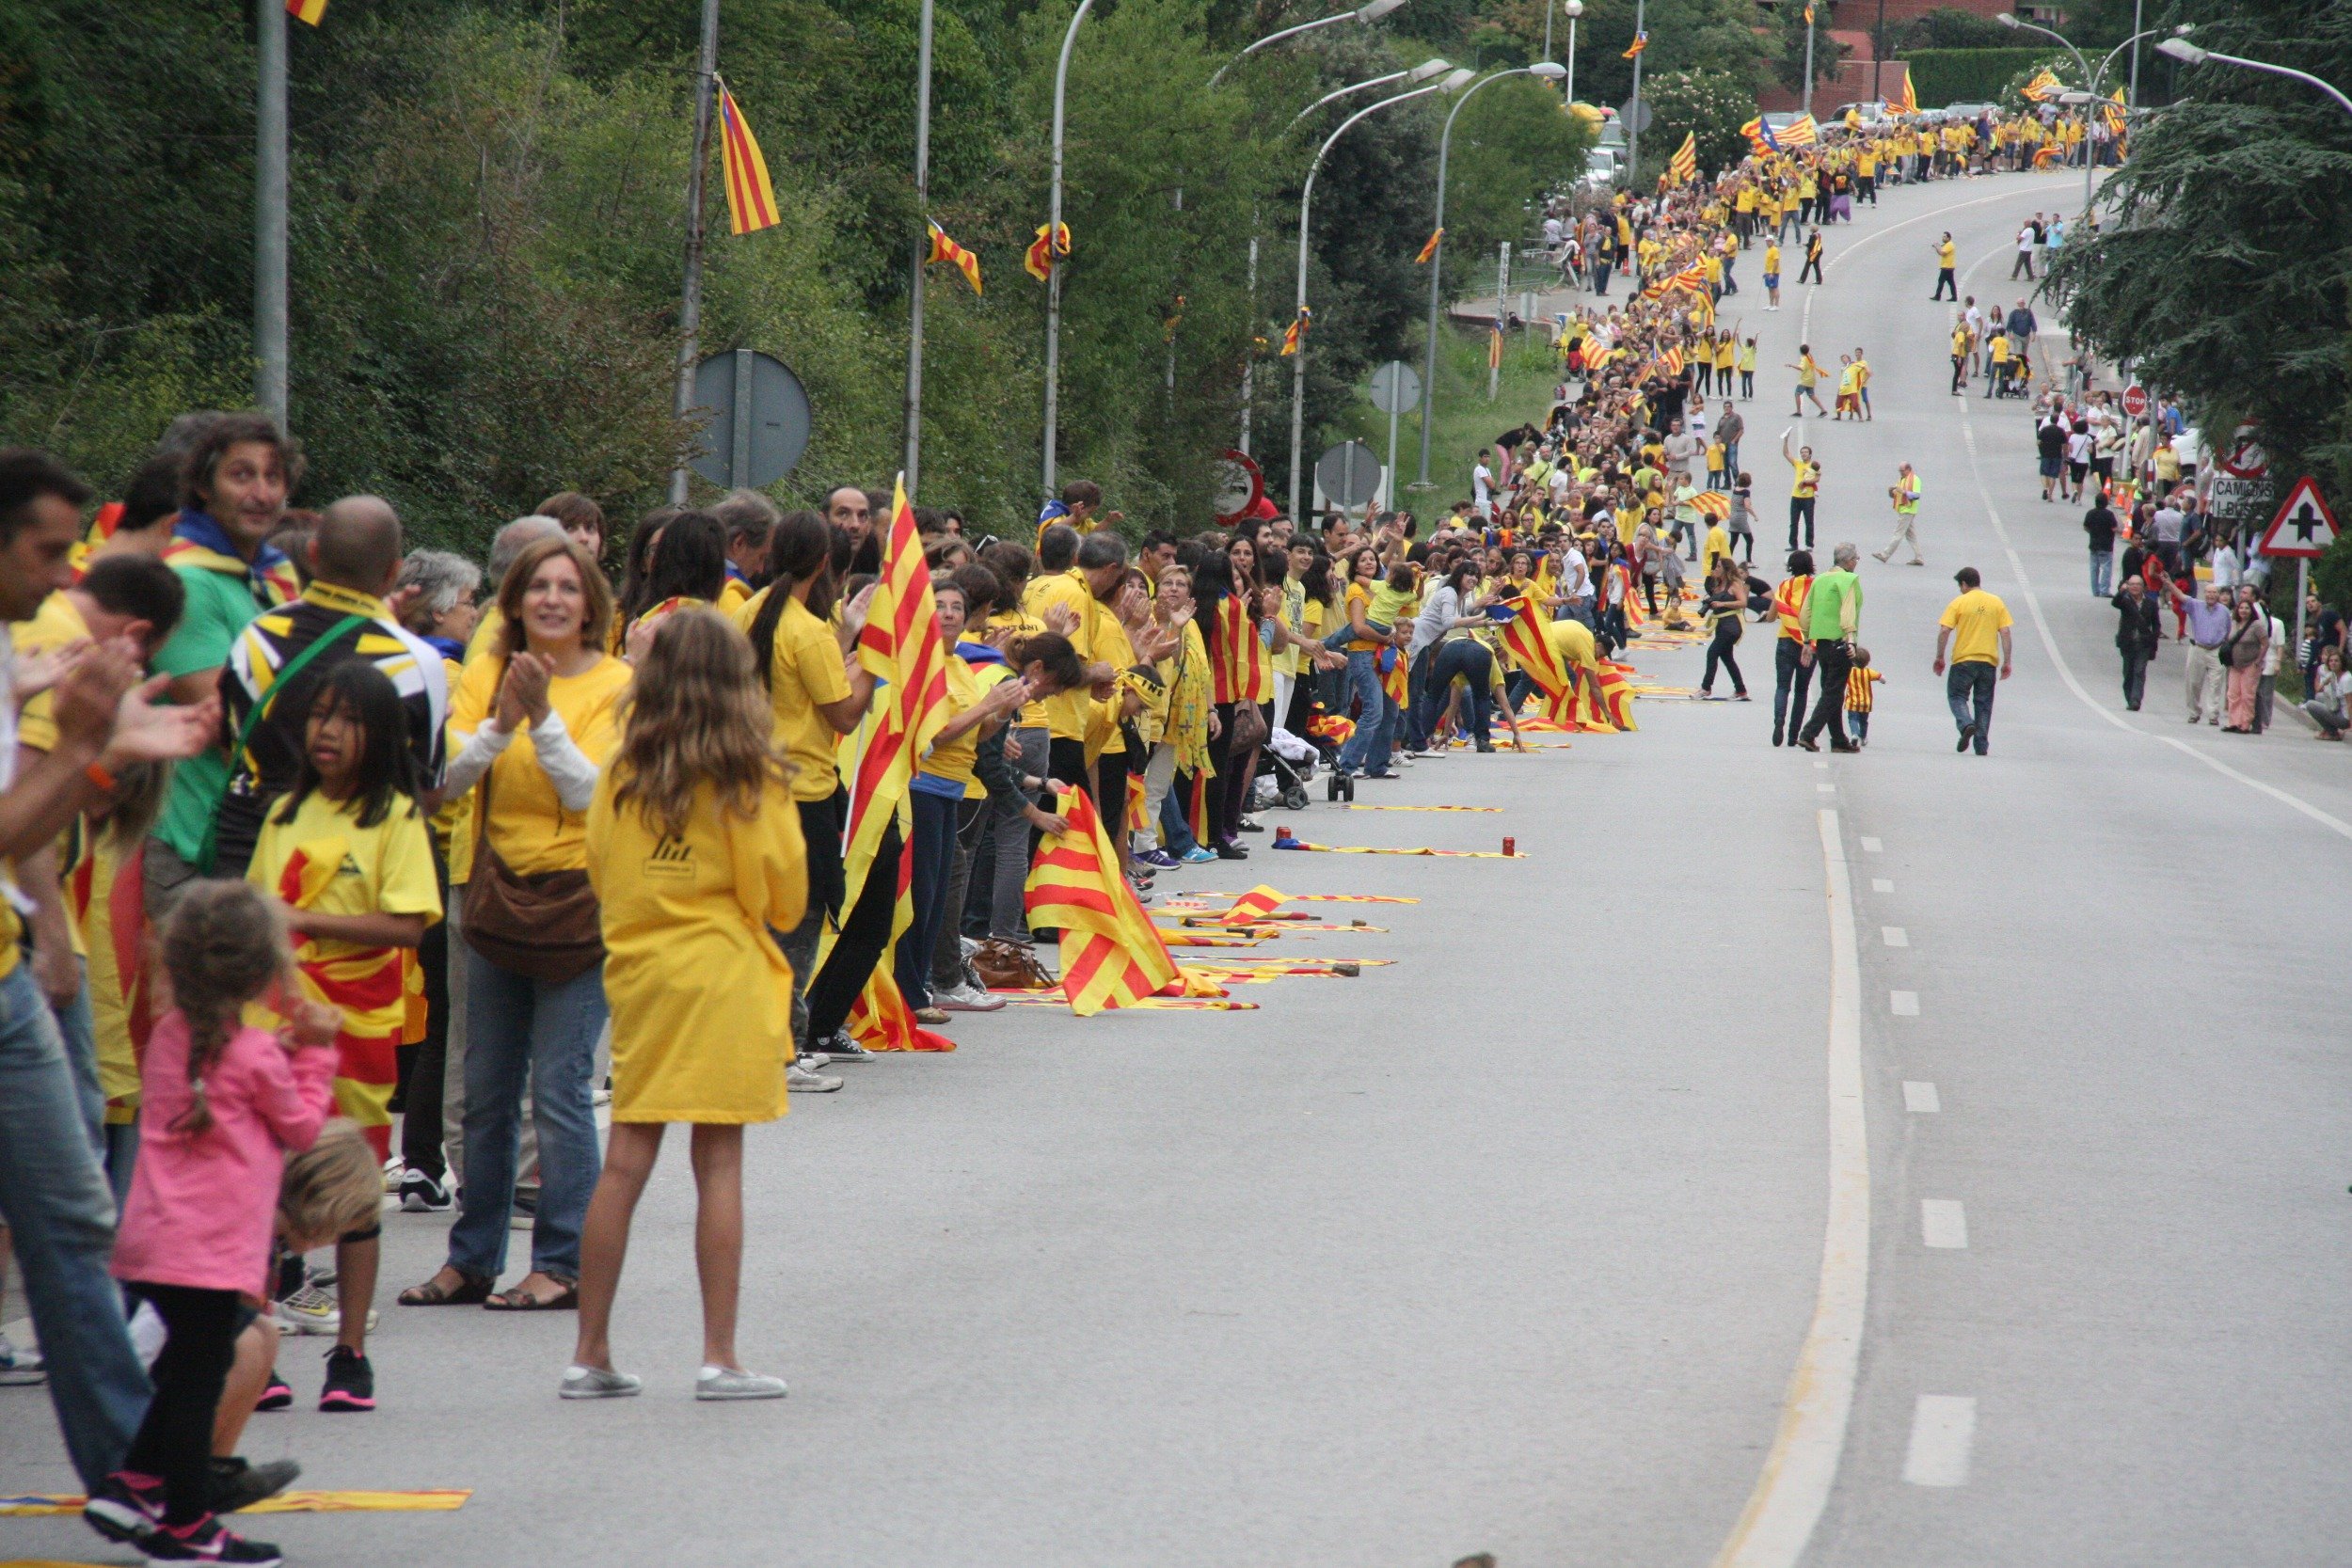 Catalan National Day rallies, rebellion according to Spain's Civil Guard